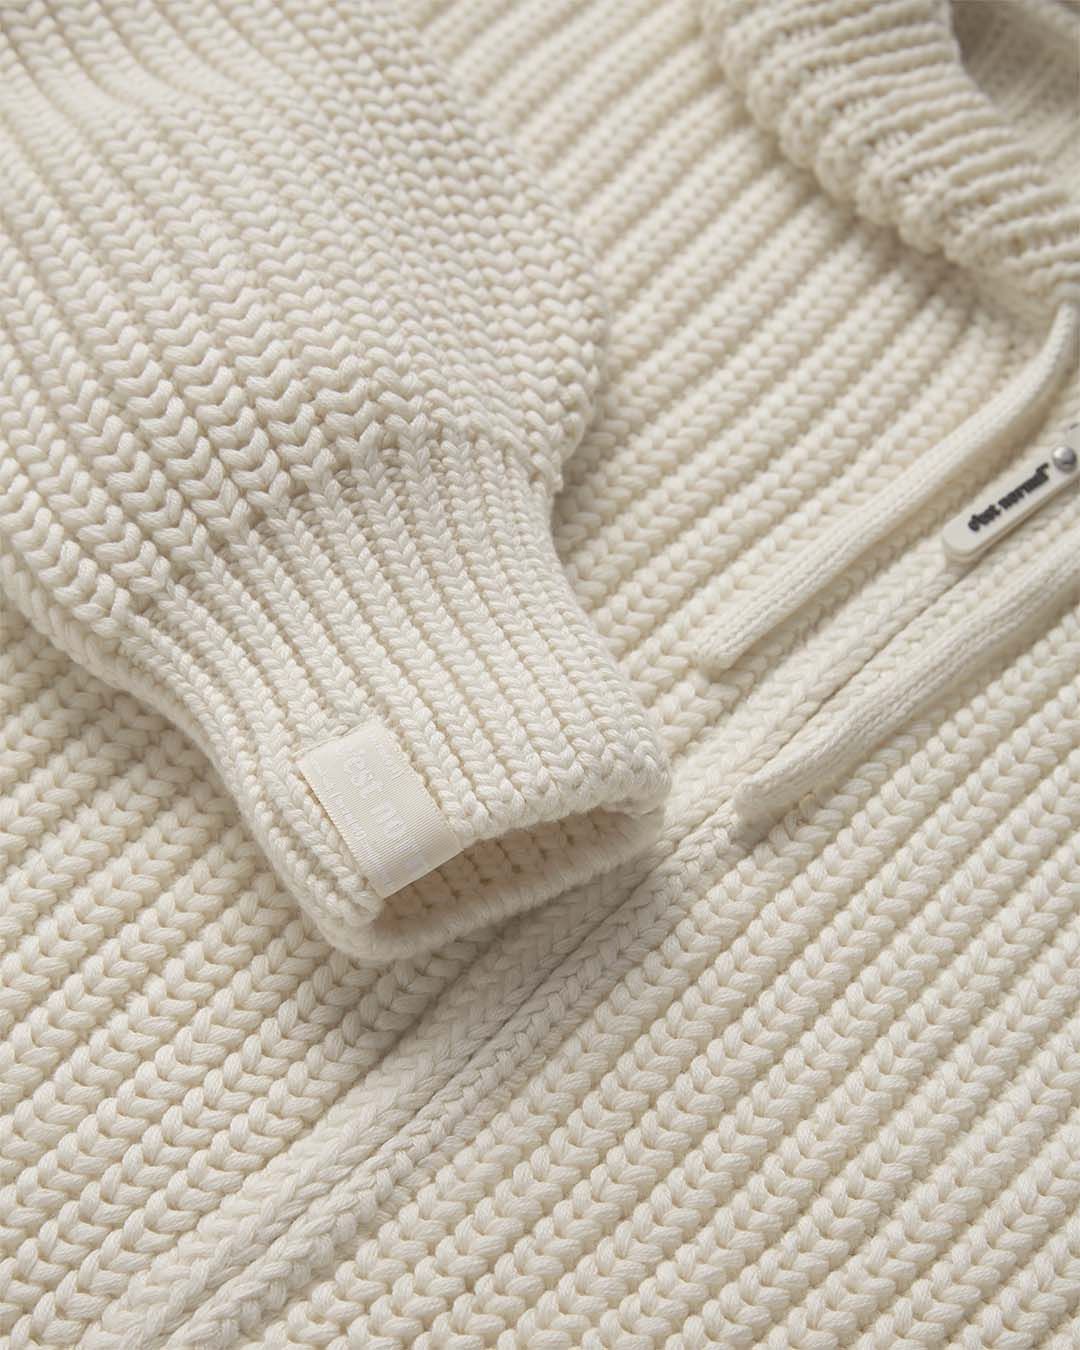 The Knit 